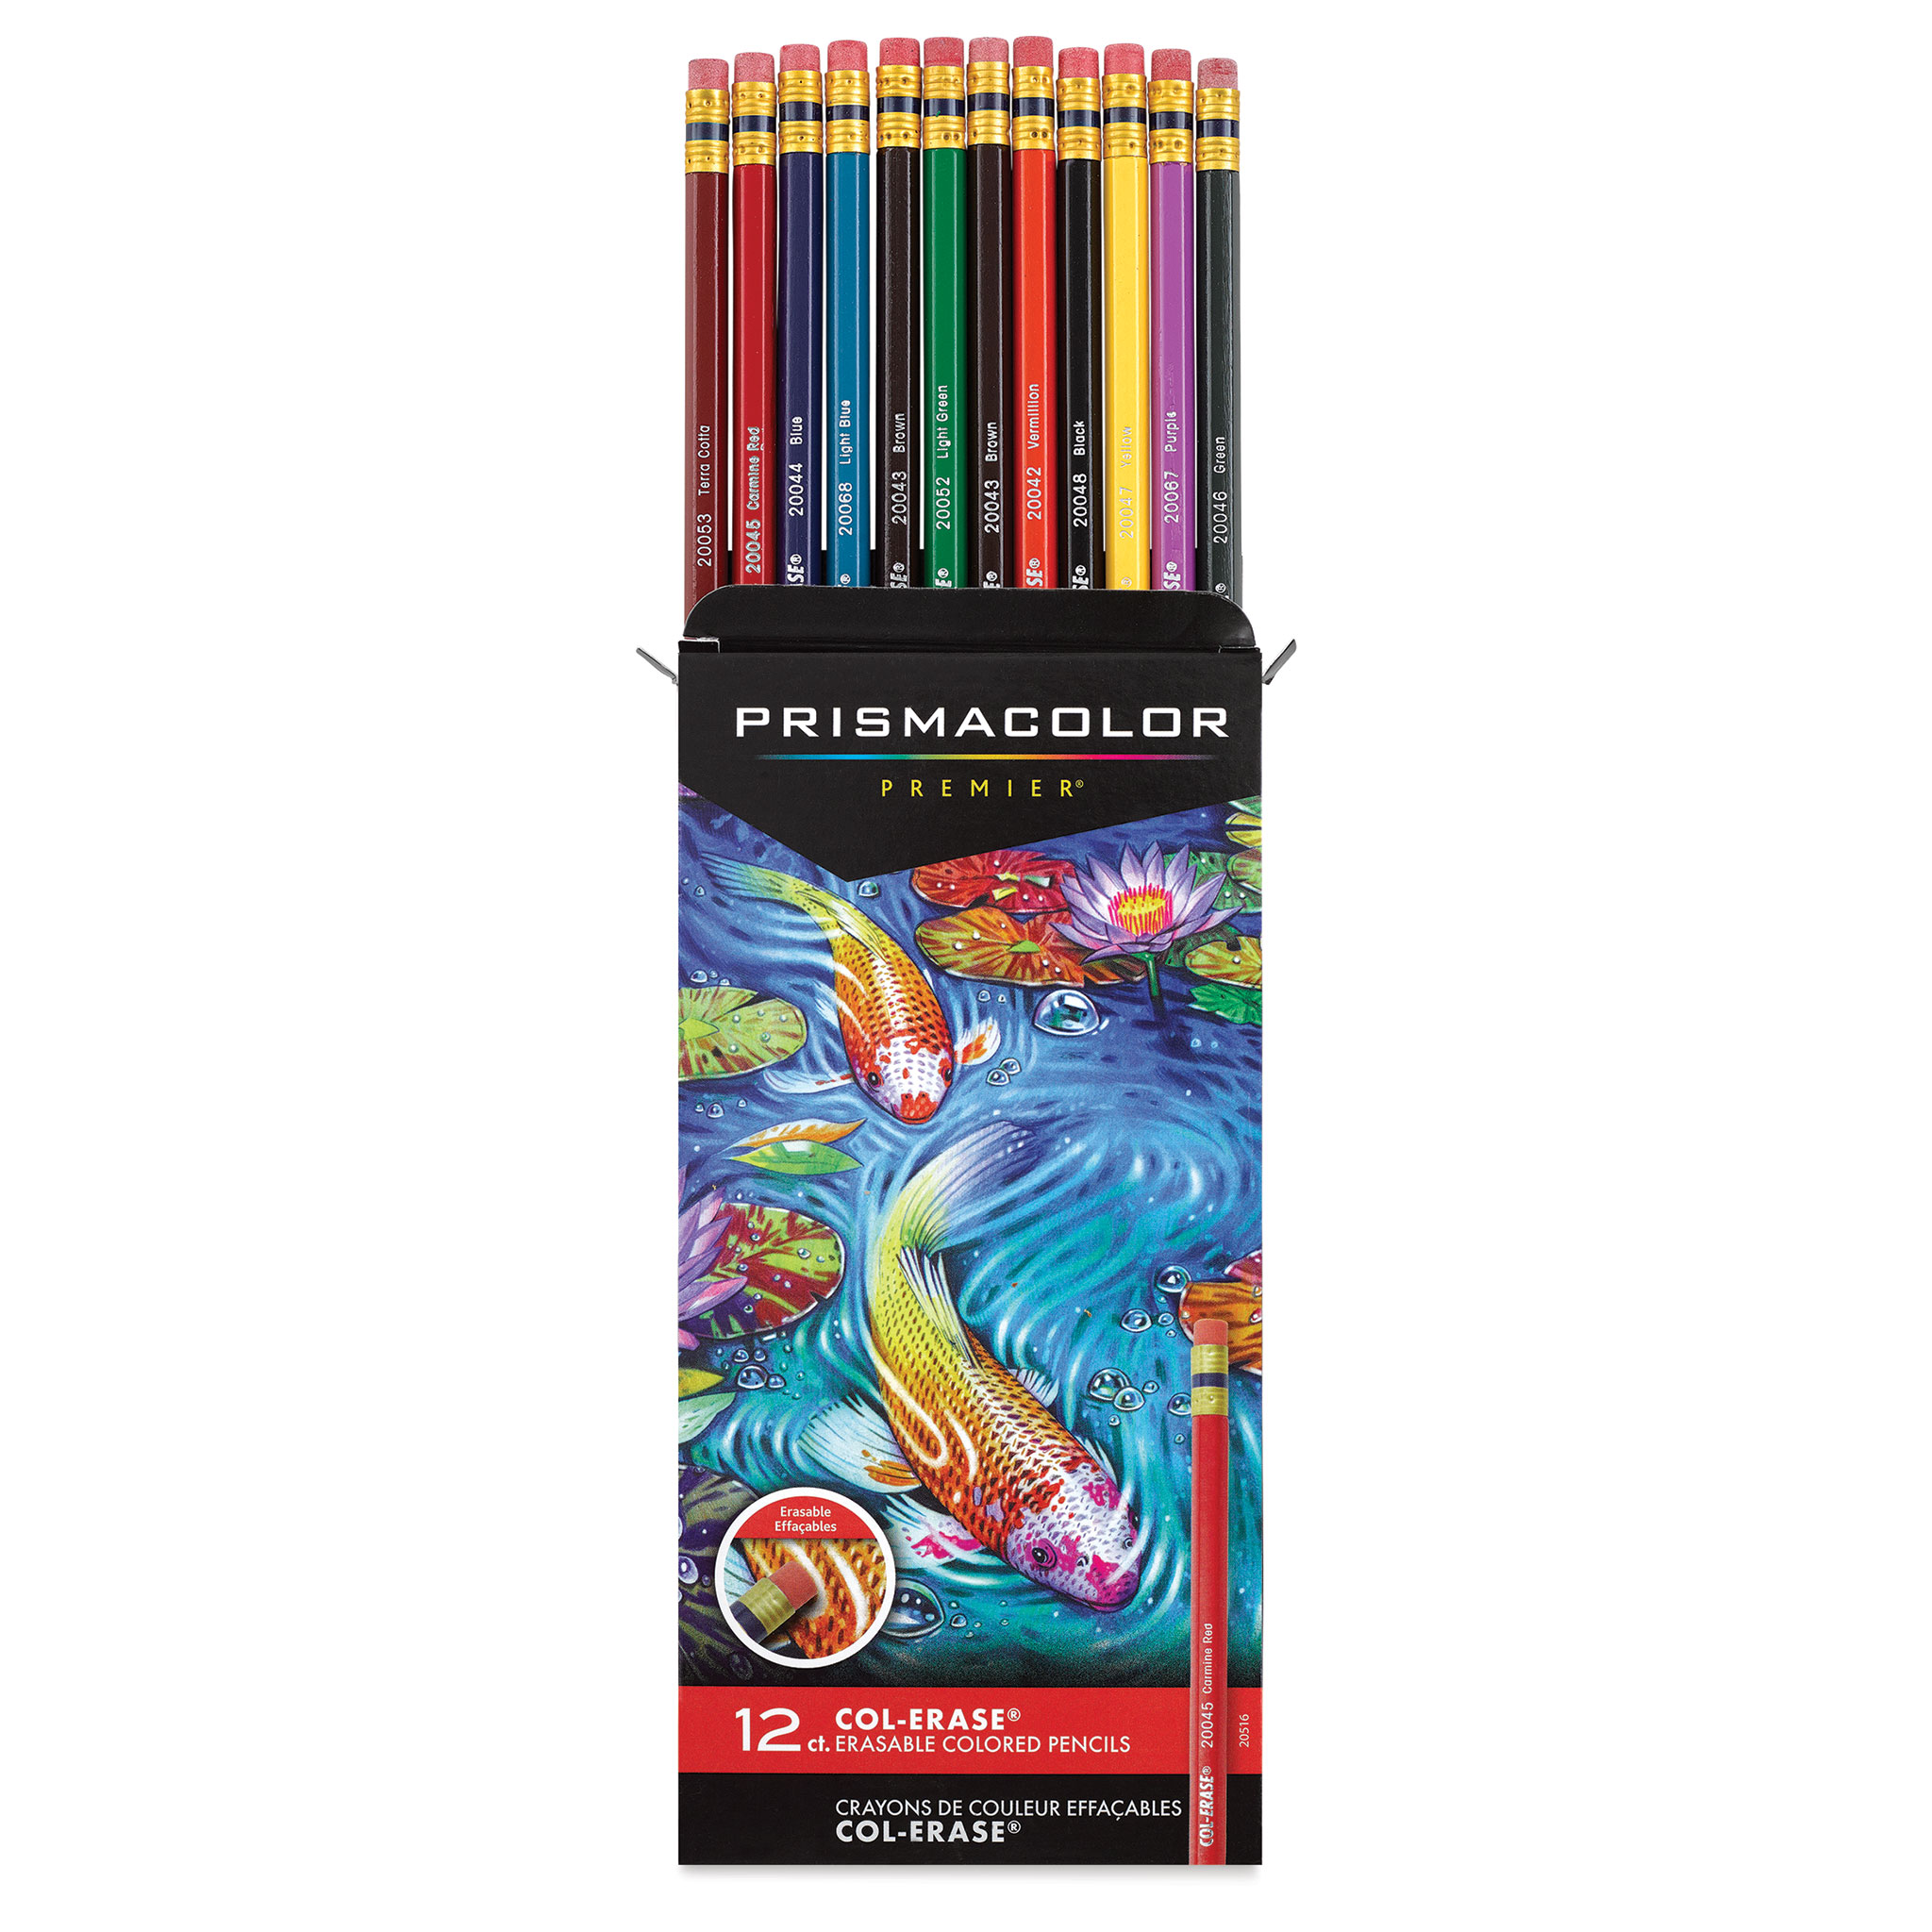 Professional and Artist Colored Pencils Listing